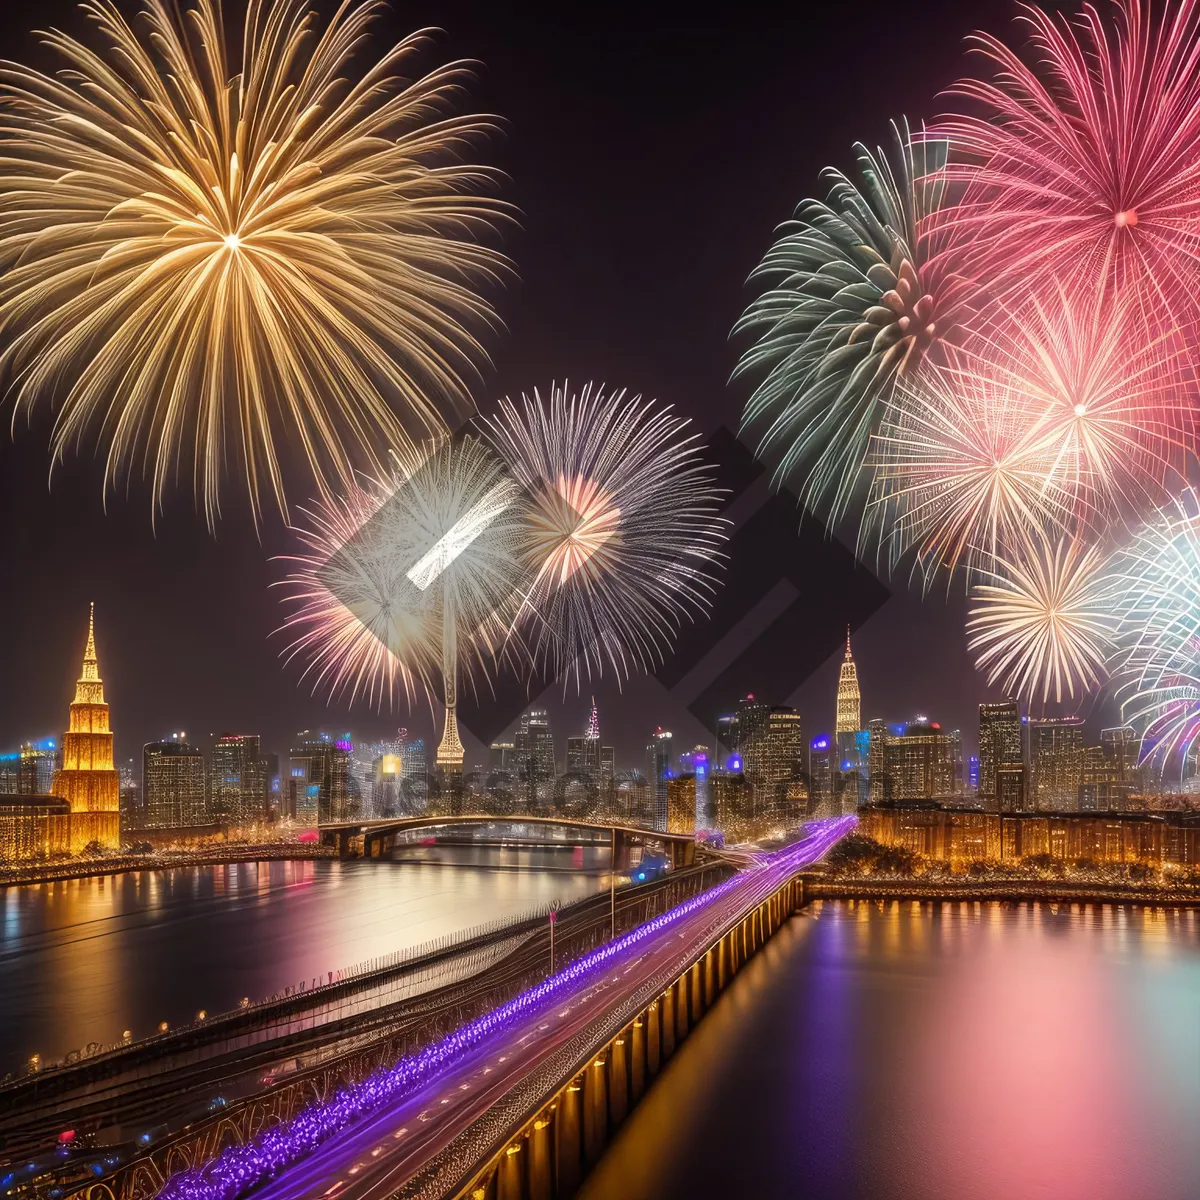 Picture of Night Sky Fireworks: Bright Explosion of Colorful Lighting